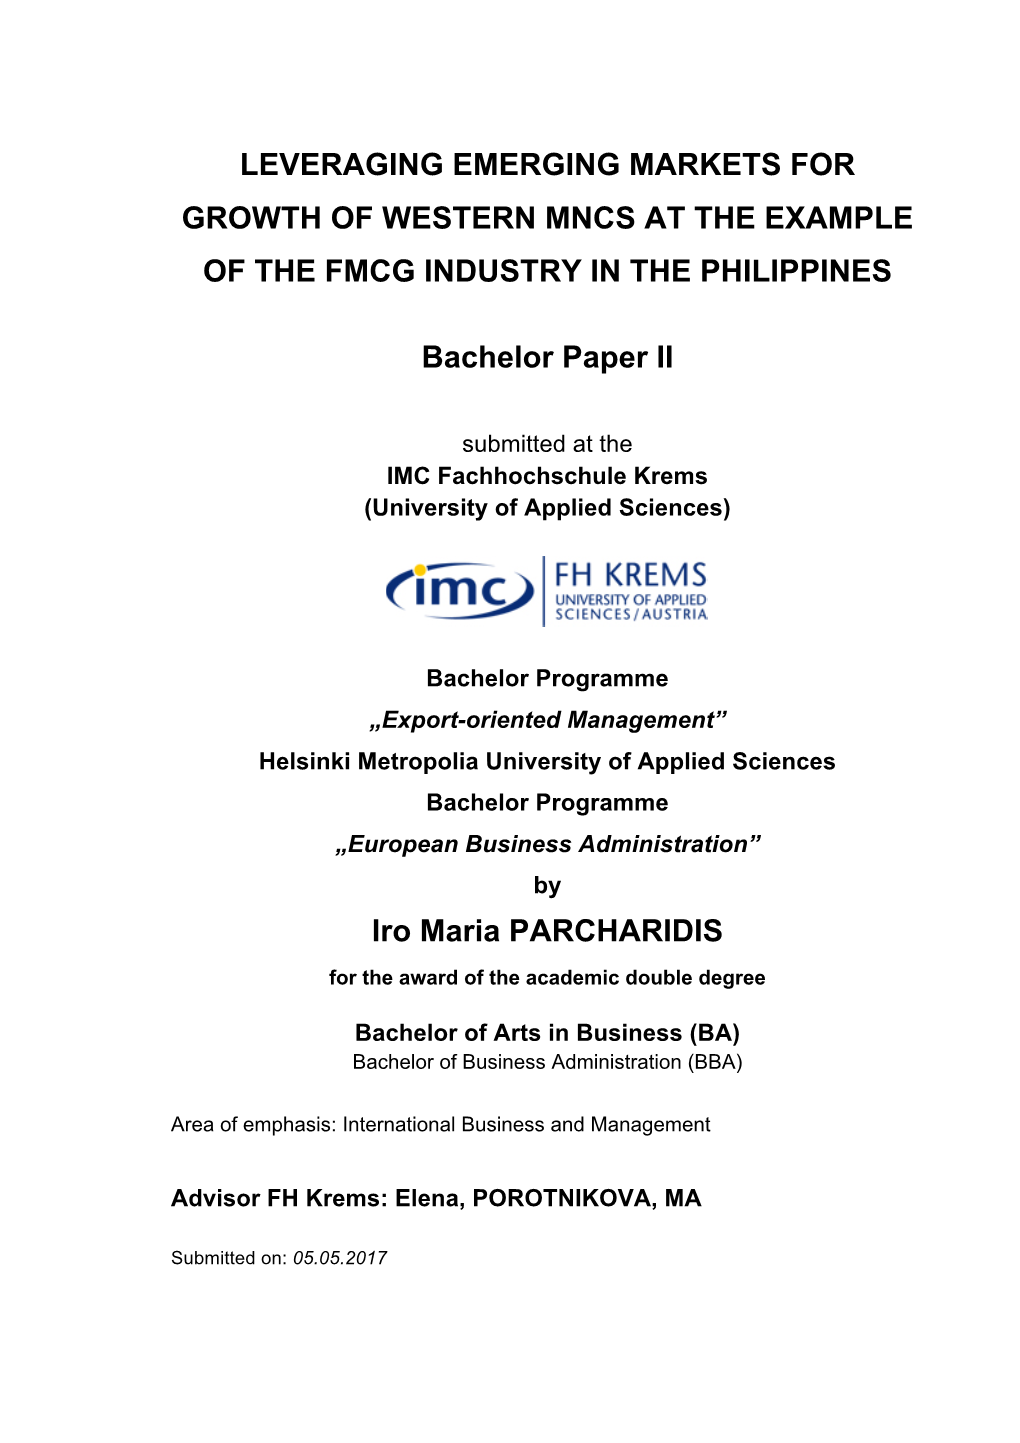 Leveraging Emerging Markets for Growth of Western Mncs at the Example of the Fmcg Industry in the Philippines